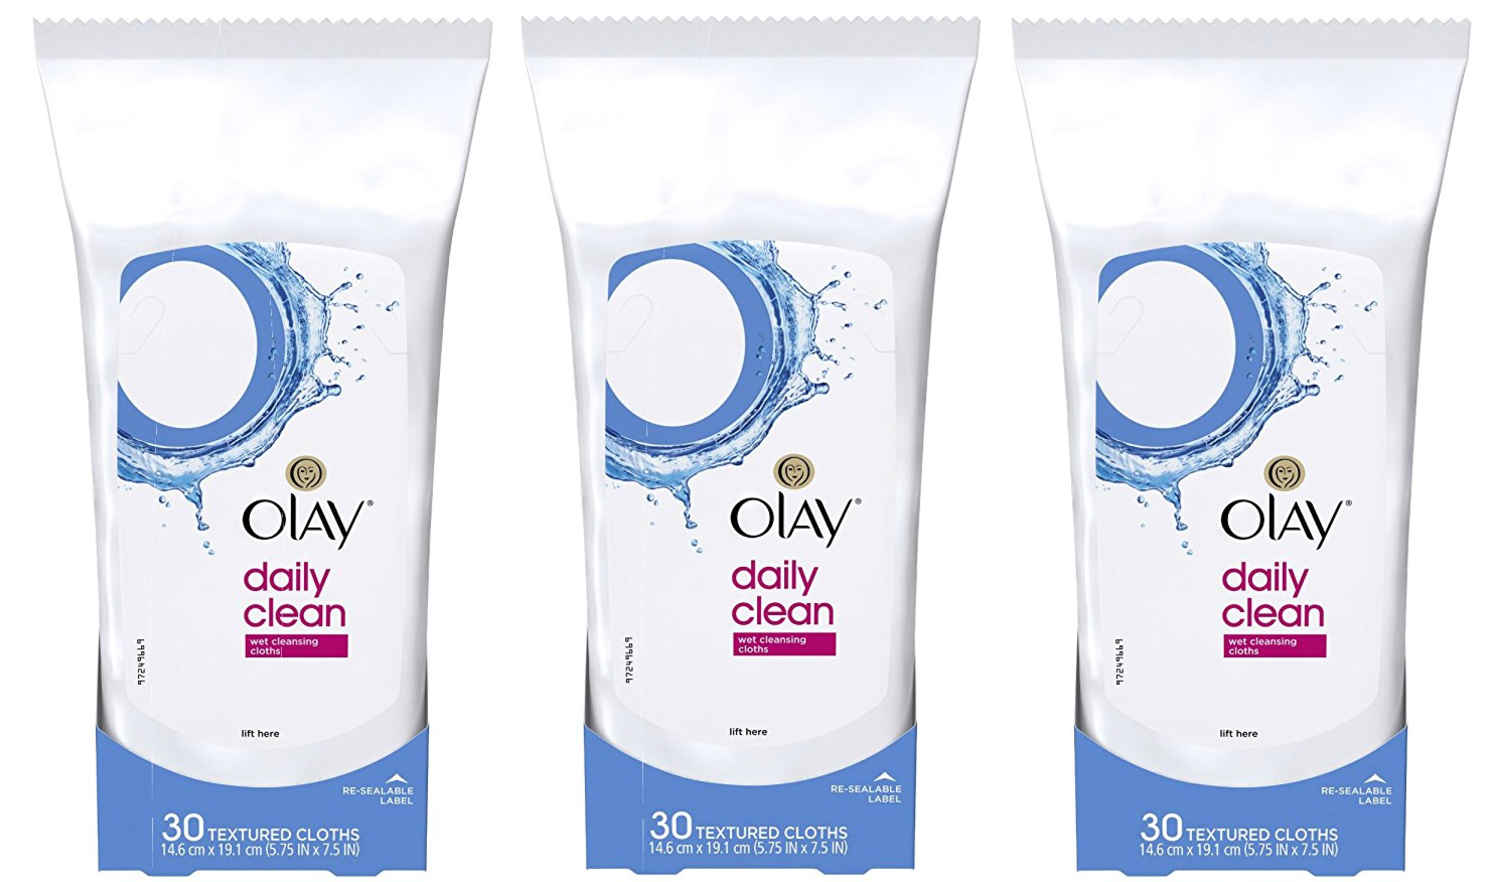 *Price Mistake?!* Olay Normal Wet Cleansing Cloths, 30-Count (Pack of 3) as low as $1.55/pack shipped ($4.65 Total!)